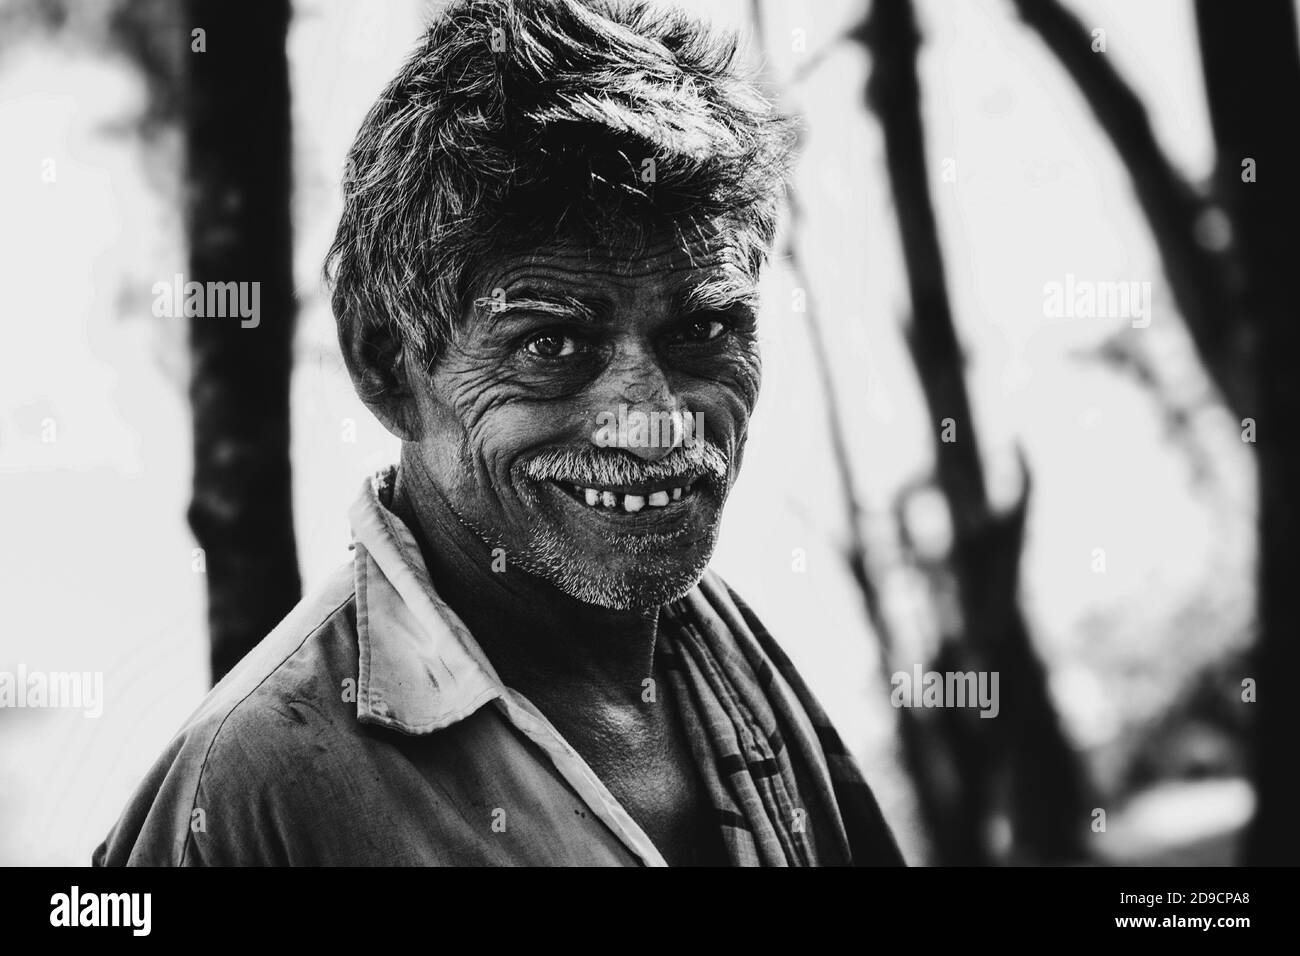 Lifestyle photos of homeless people in Bangladesh Stock Photo